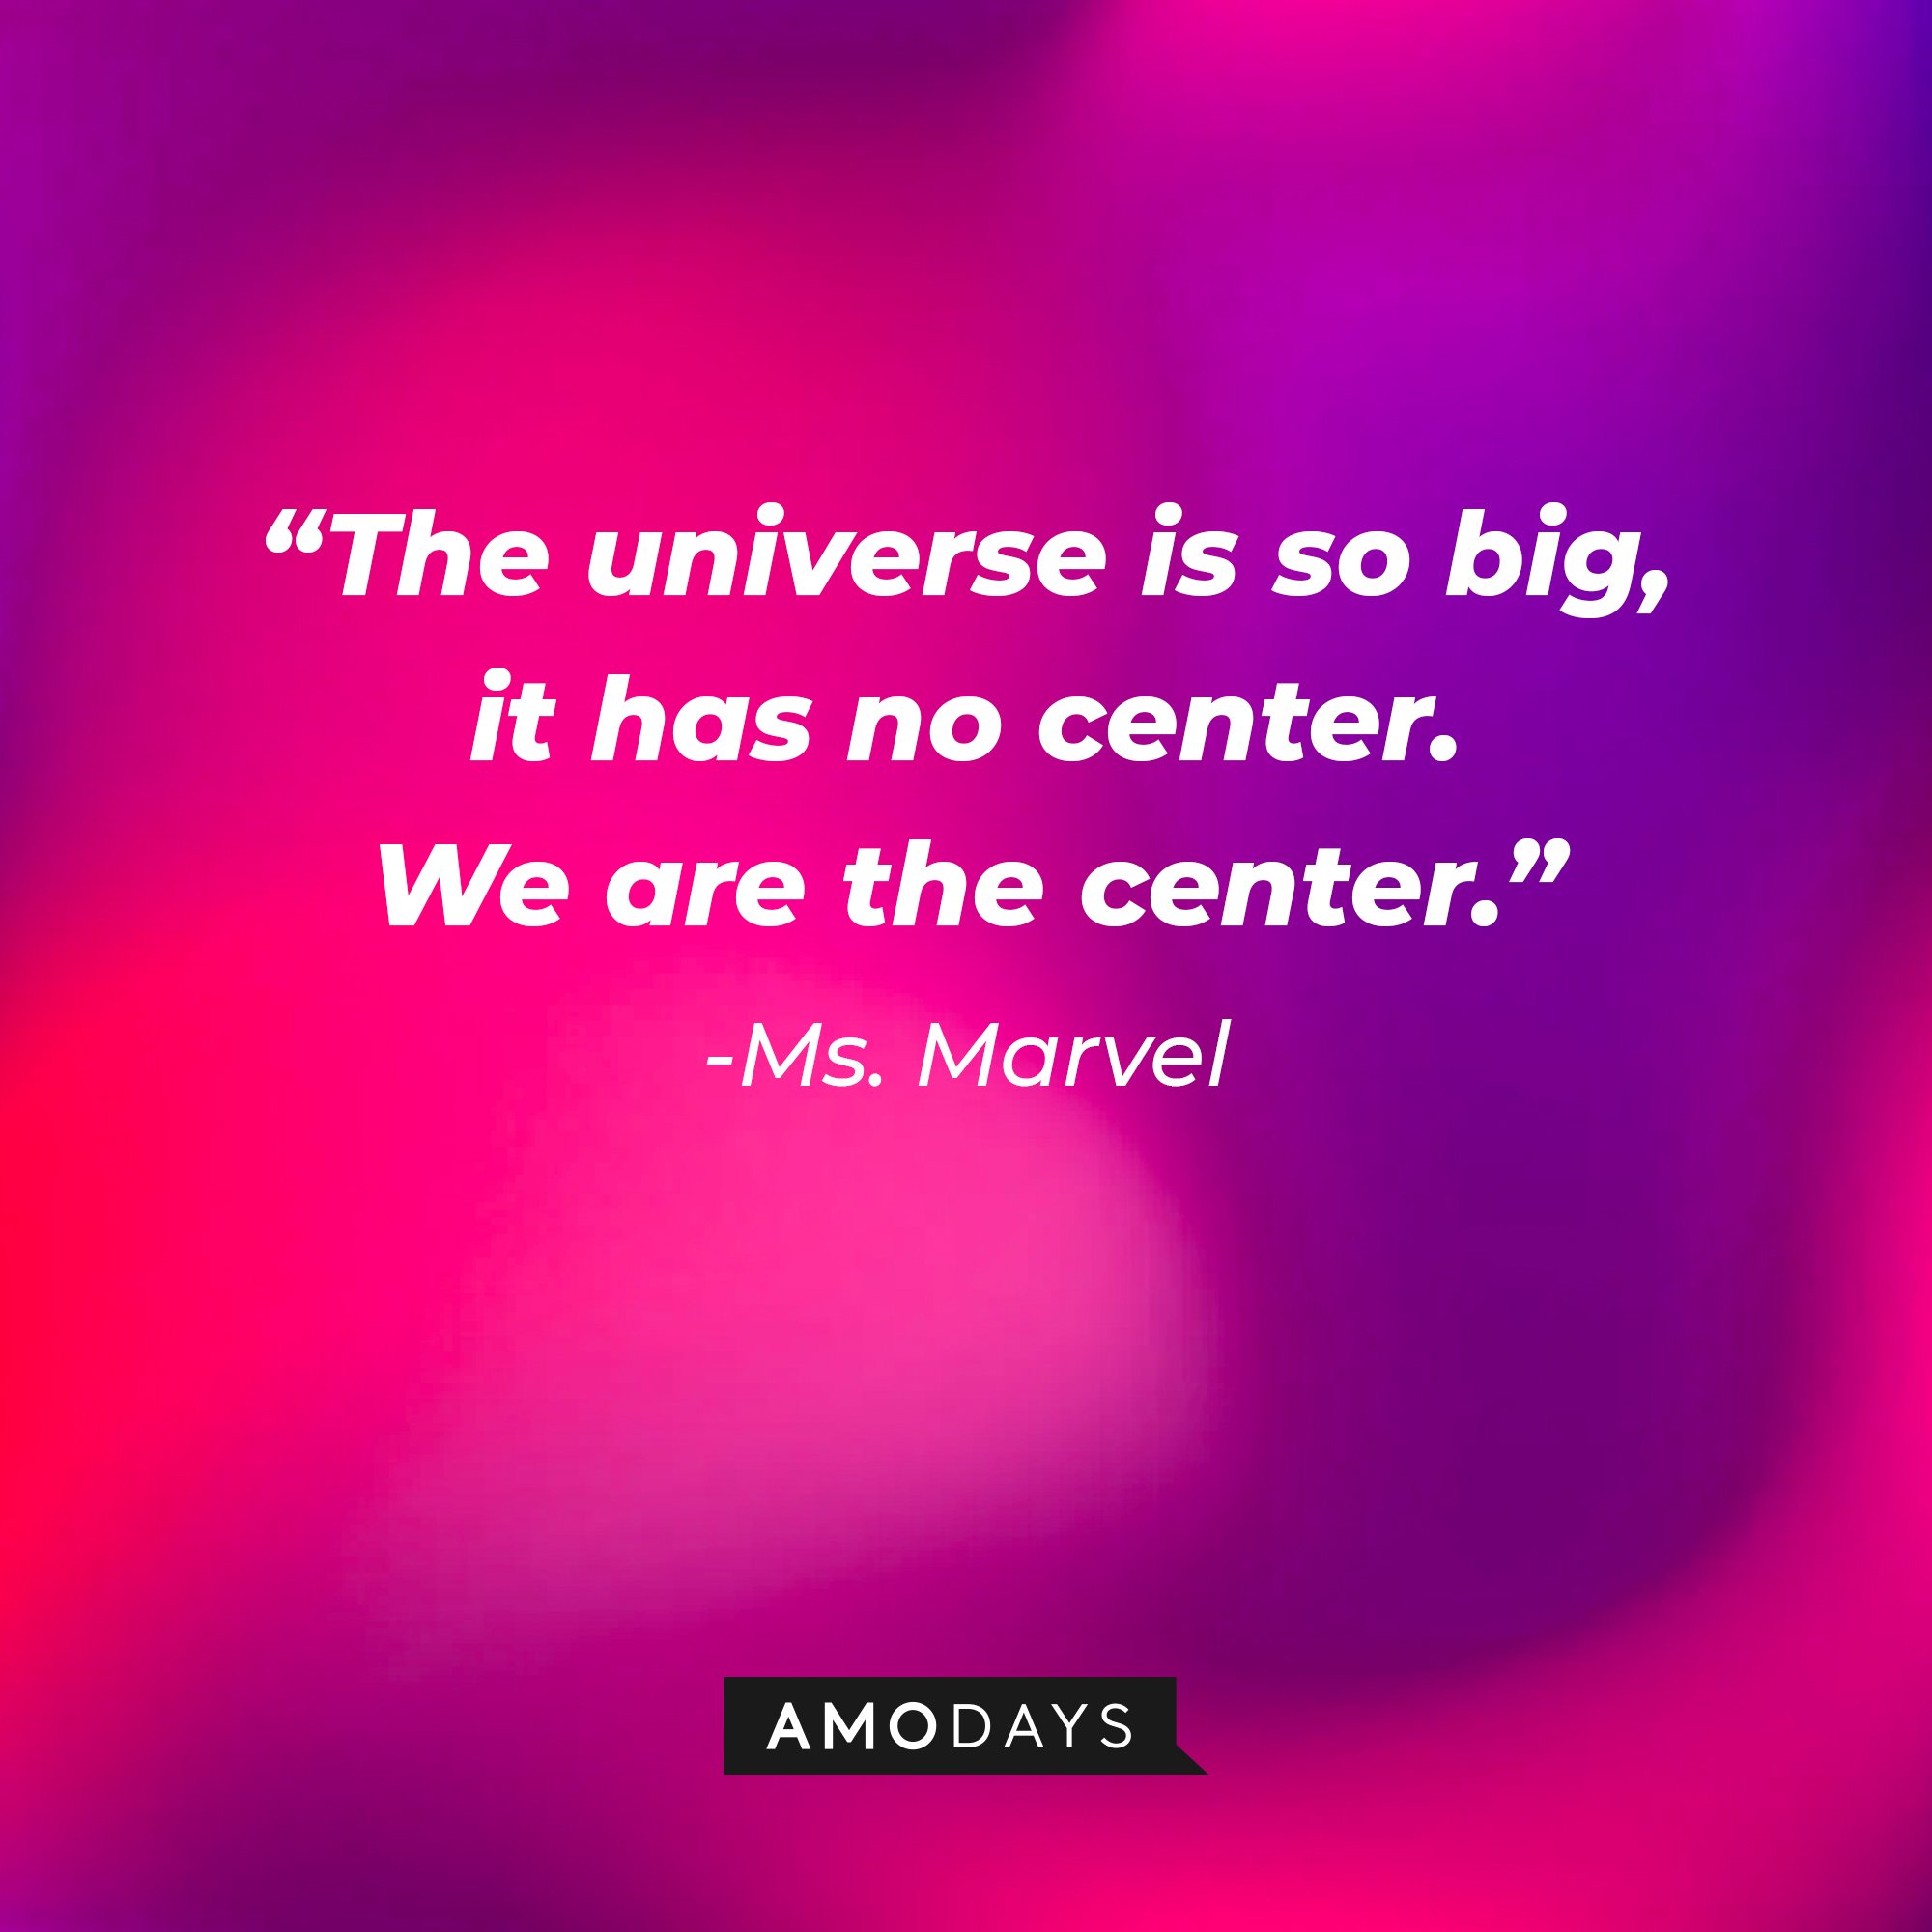 Ms. Marvel's quote: "The universe is so big, it has no center. We are the center." | Image: AmoDays